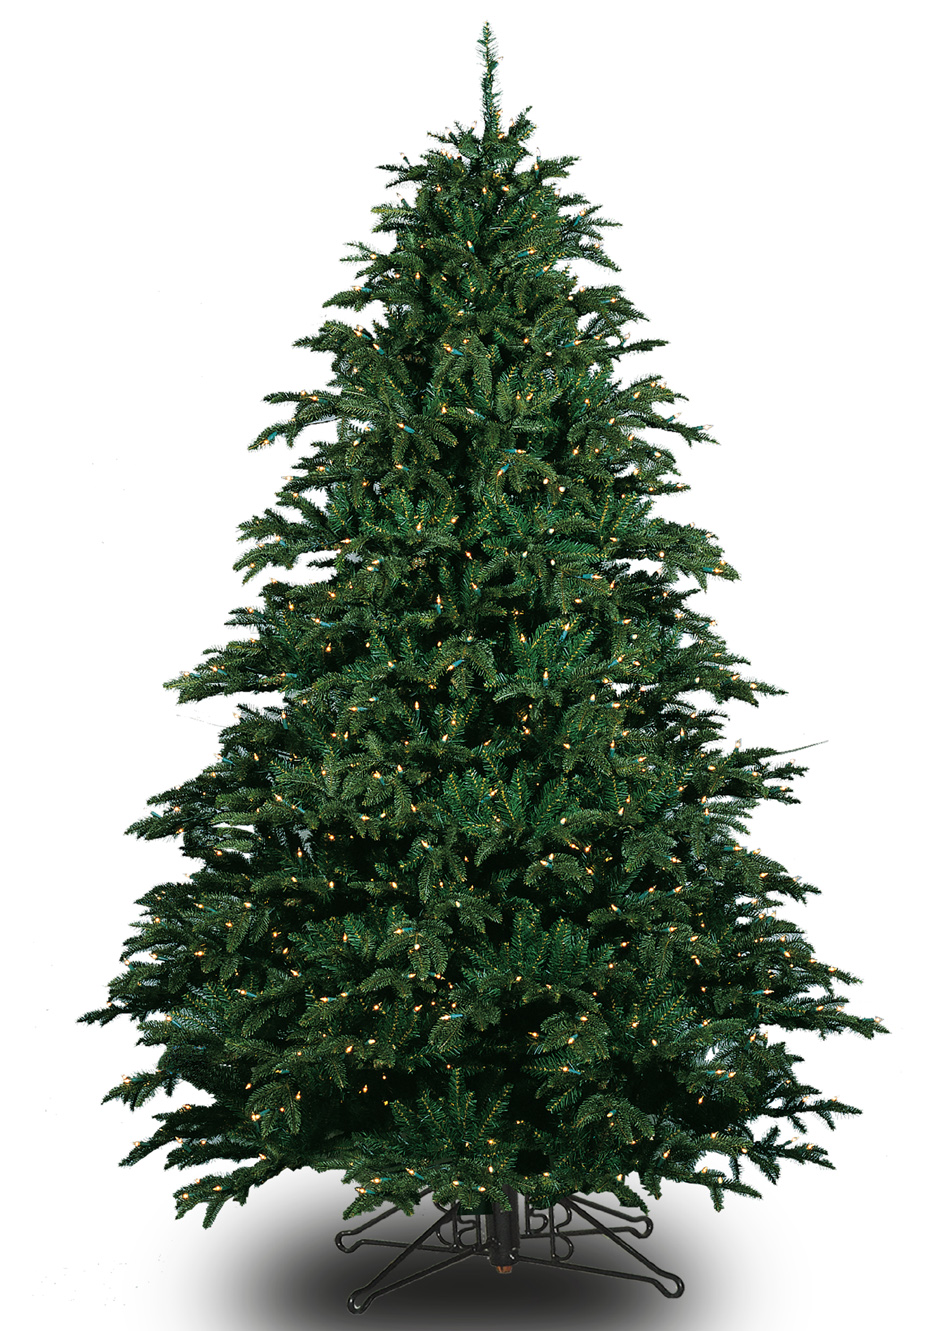 Alaskan Deluxe Christmas Tree - Warm White LED Lights - One-Plug Power Supply - 14ft Tall